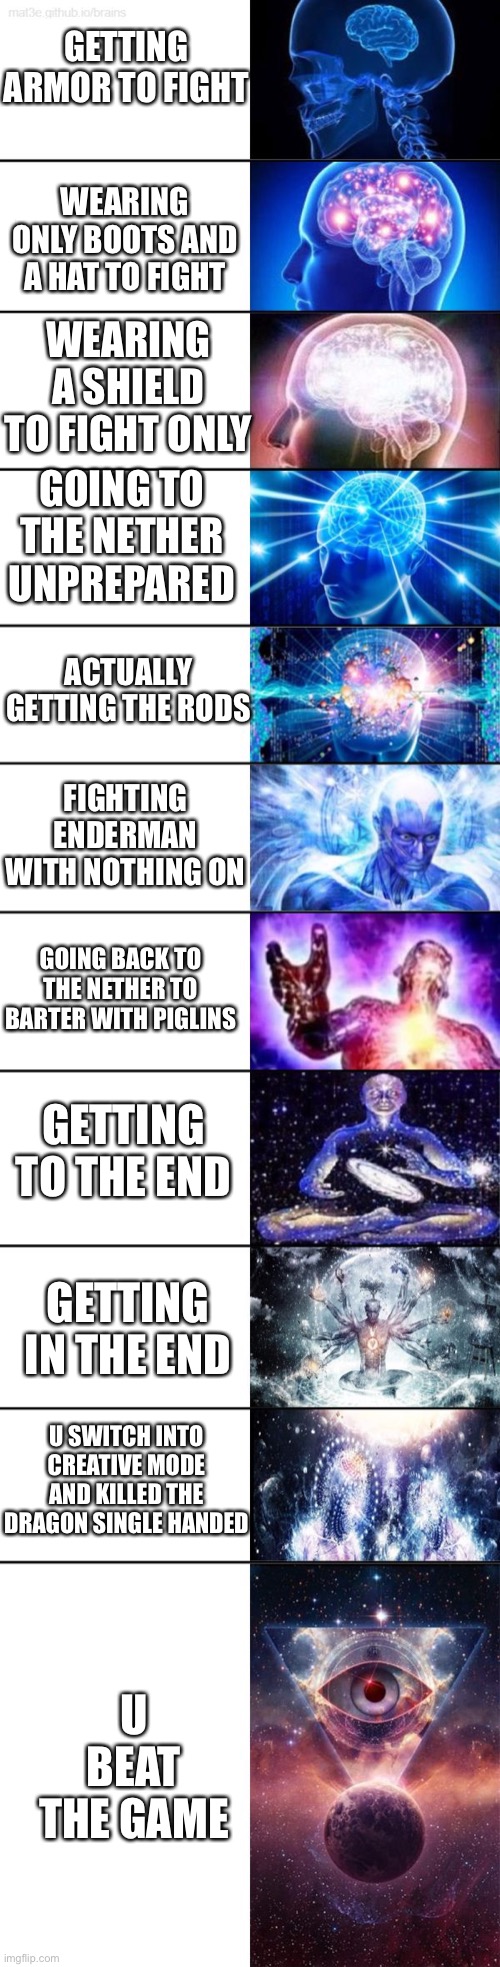 Noice | GETTING ARMOR TO FIGHT; WEARING ONLY BOOTS AND A HAT TO FIGHT; WEARING A SHIELD TO FIGHT ONLY; GOING TO THE NETHER UNPREPARED; ACTUALLY GETTING THE RODS; FIGHTING ENDERMAN WITH NOTHING ON; GOING BACK TO THE NETHER TO BARTER WITH PIGLINS; GETTING TO THE END; GETTING IN THE END; U SWITCH INTO CREATIVE MODE AND KILLED THE DRAGON SINGLE HANDED; U BEAT THE GAME | image tagged in that's a twist | made w/ Imgflip meme maker